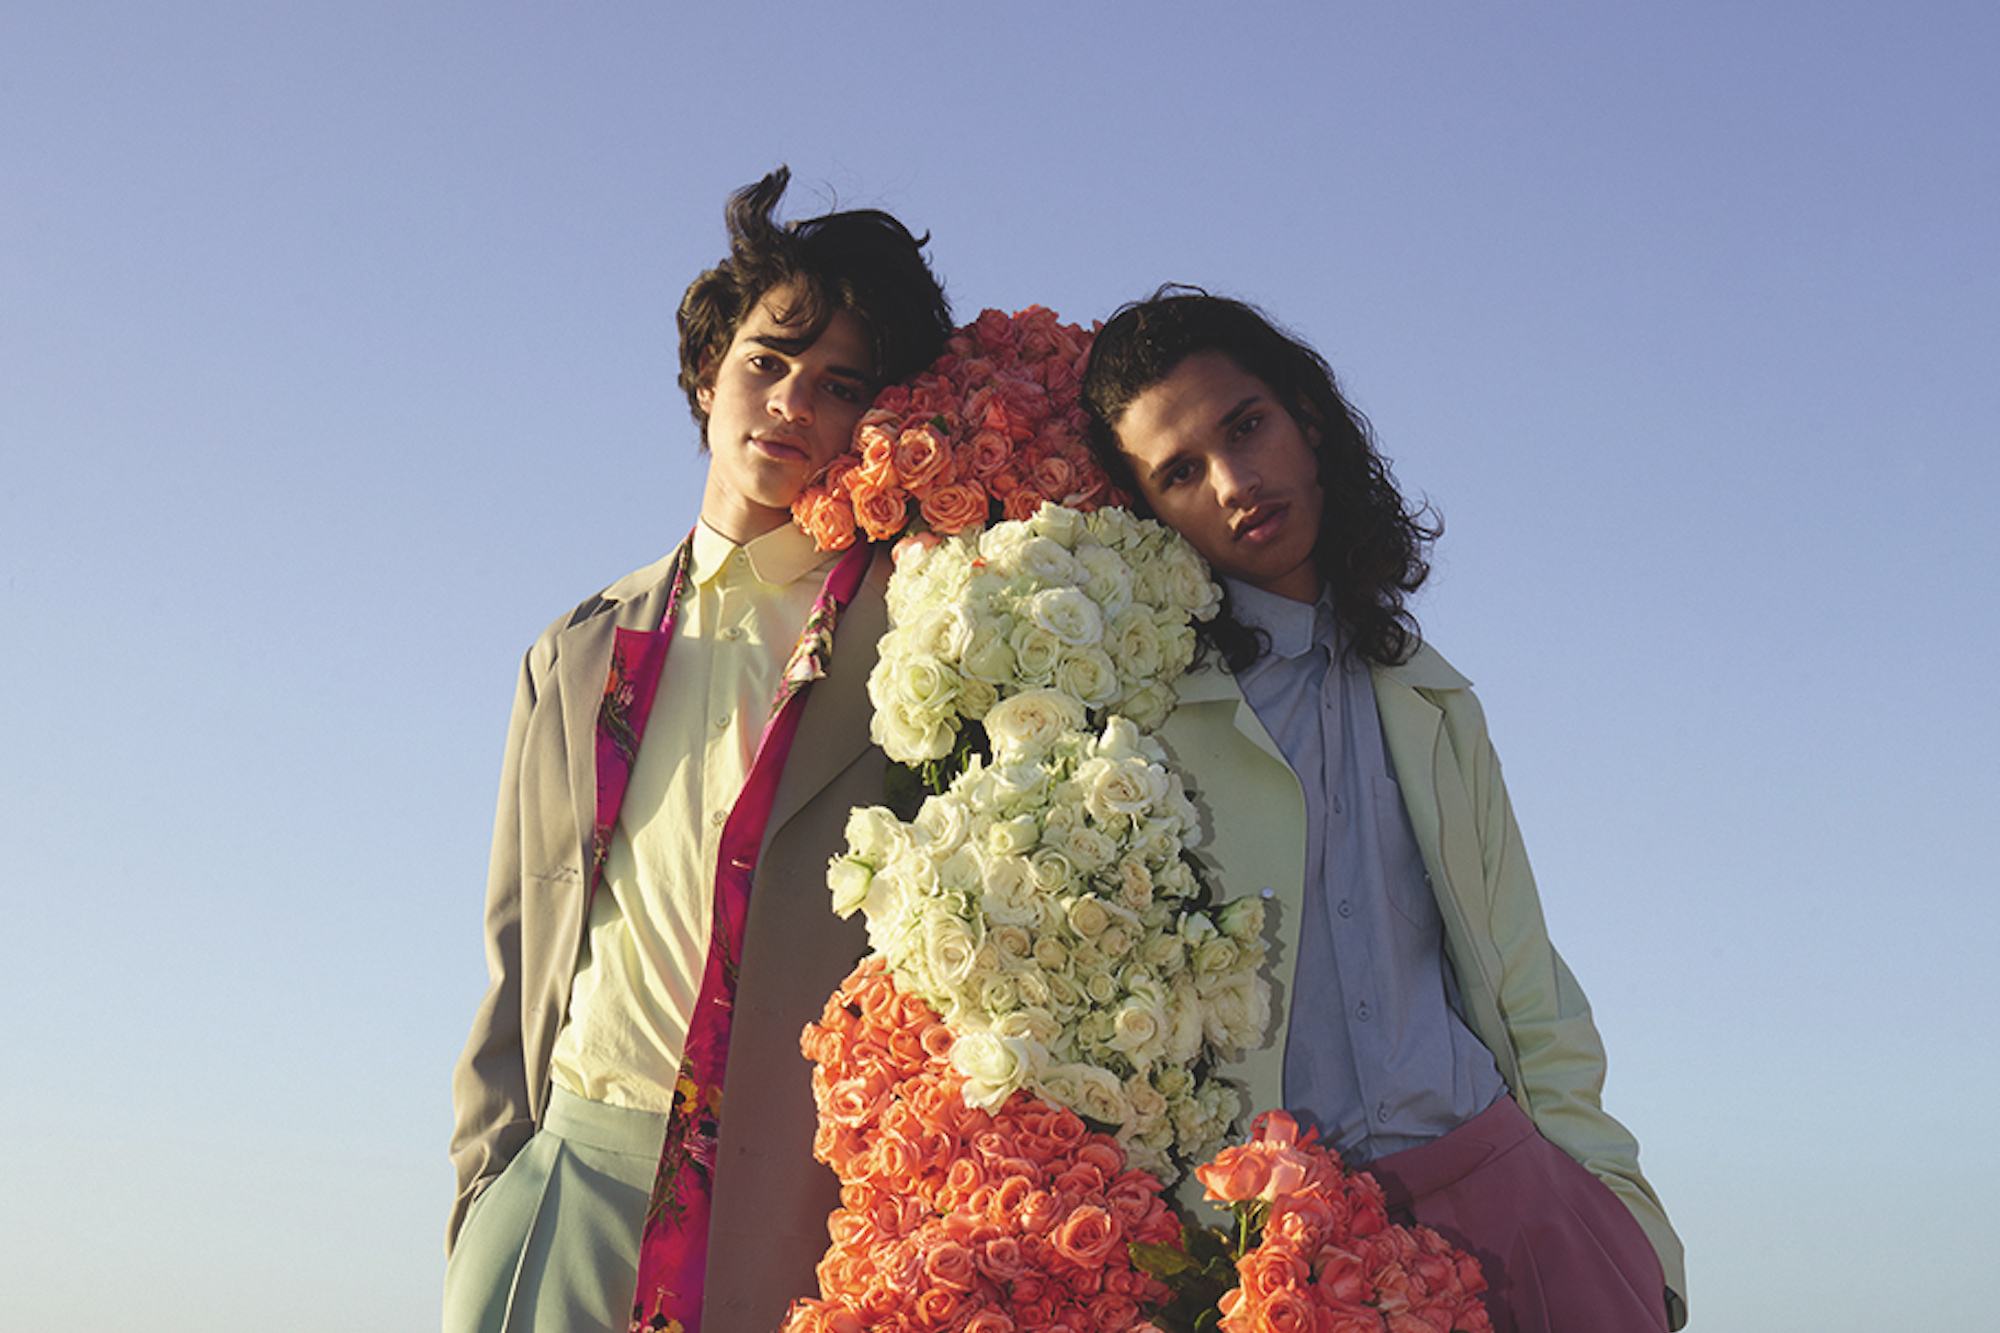 Louis Vuitton unveil flower-filled imagery for SS20 Men's titled Footprint